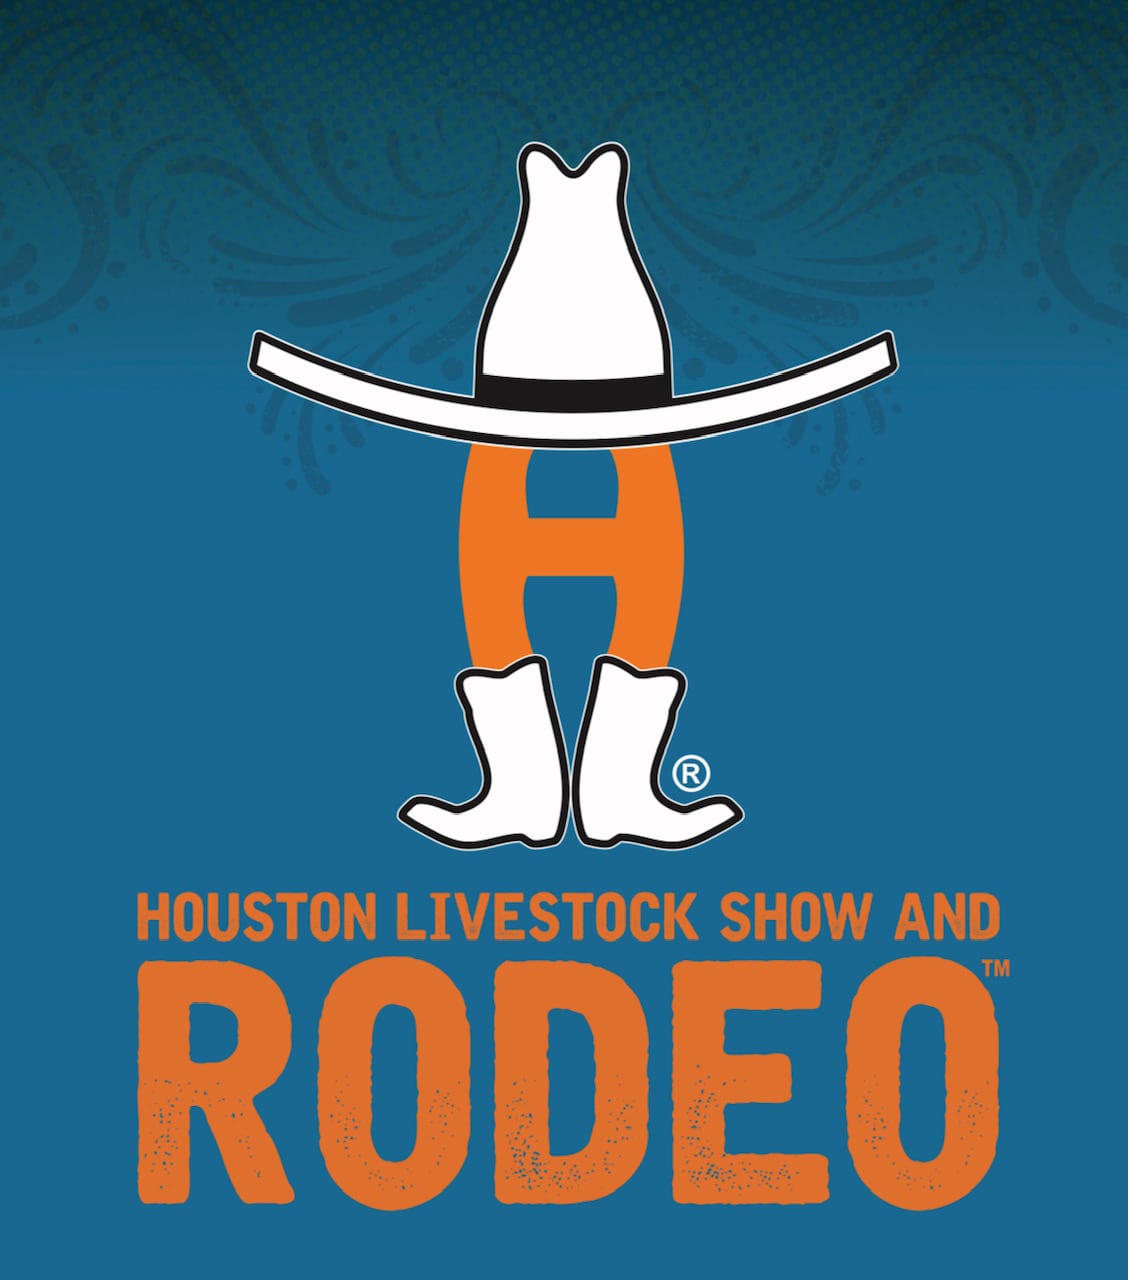 The 2019 Houston Livestock Show and Rodeo feat. Cardi B